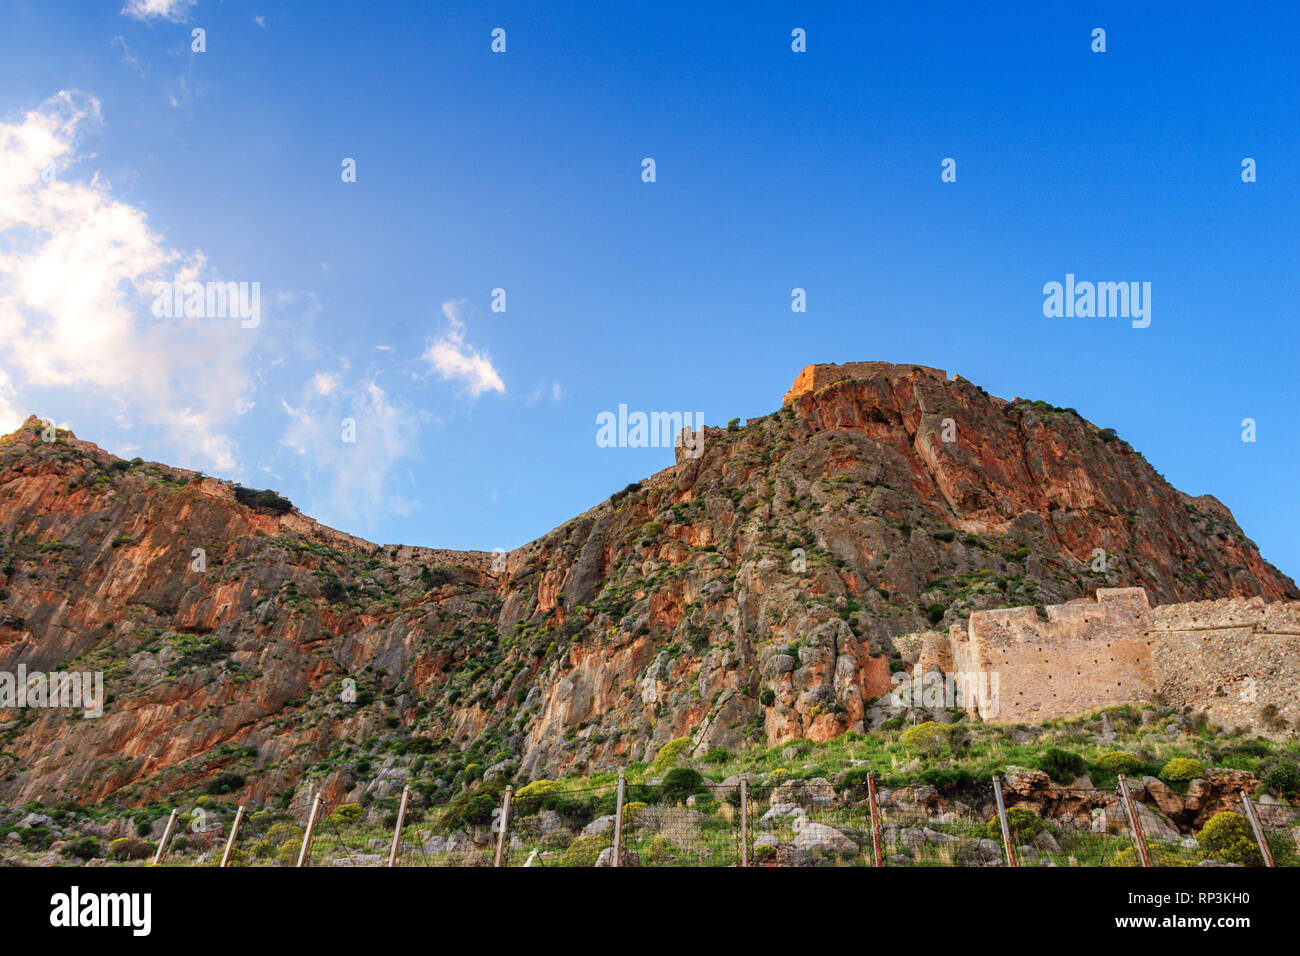 View of the fortress and the walls in Monemvasia, a medieval castle town located in Lakonia, Peloponnese, Greece. Monemvasia Stock Photo